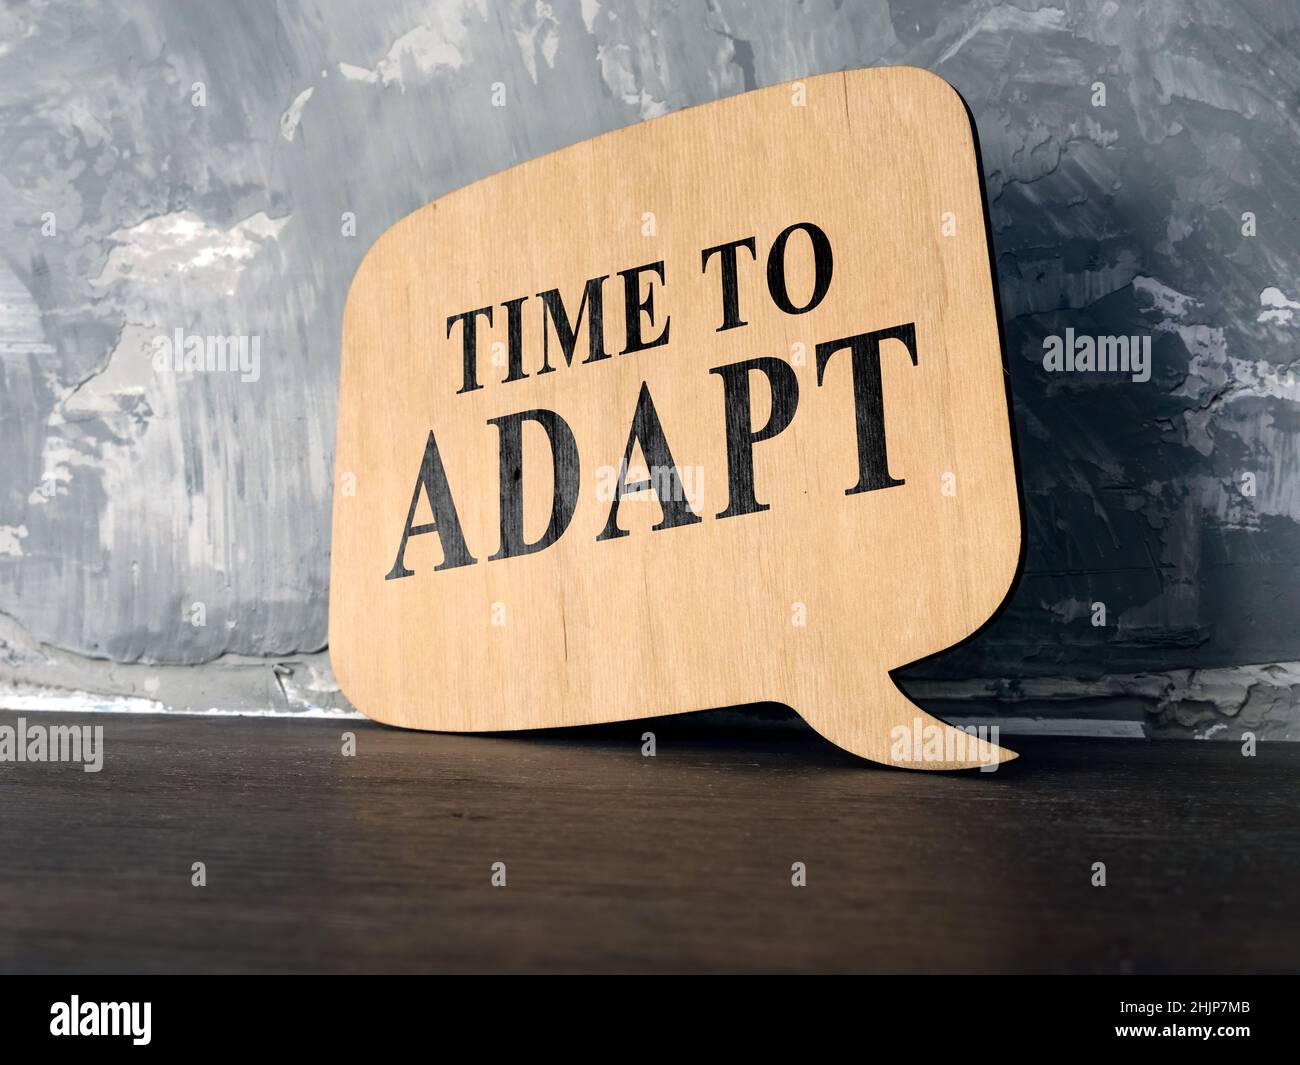 Time to adapt phrase on the wooden desk. Stock Photo